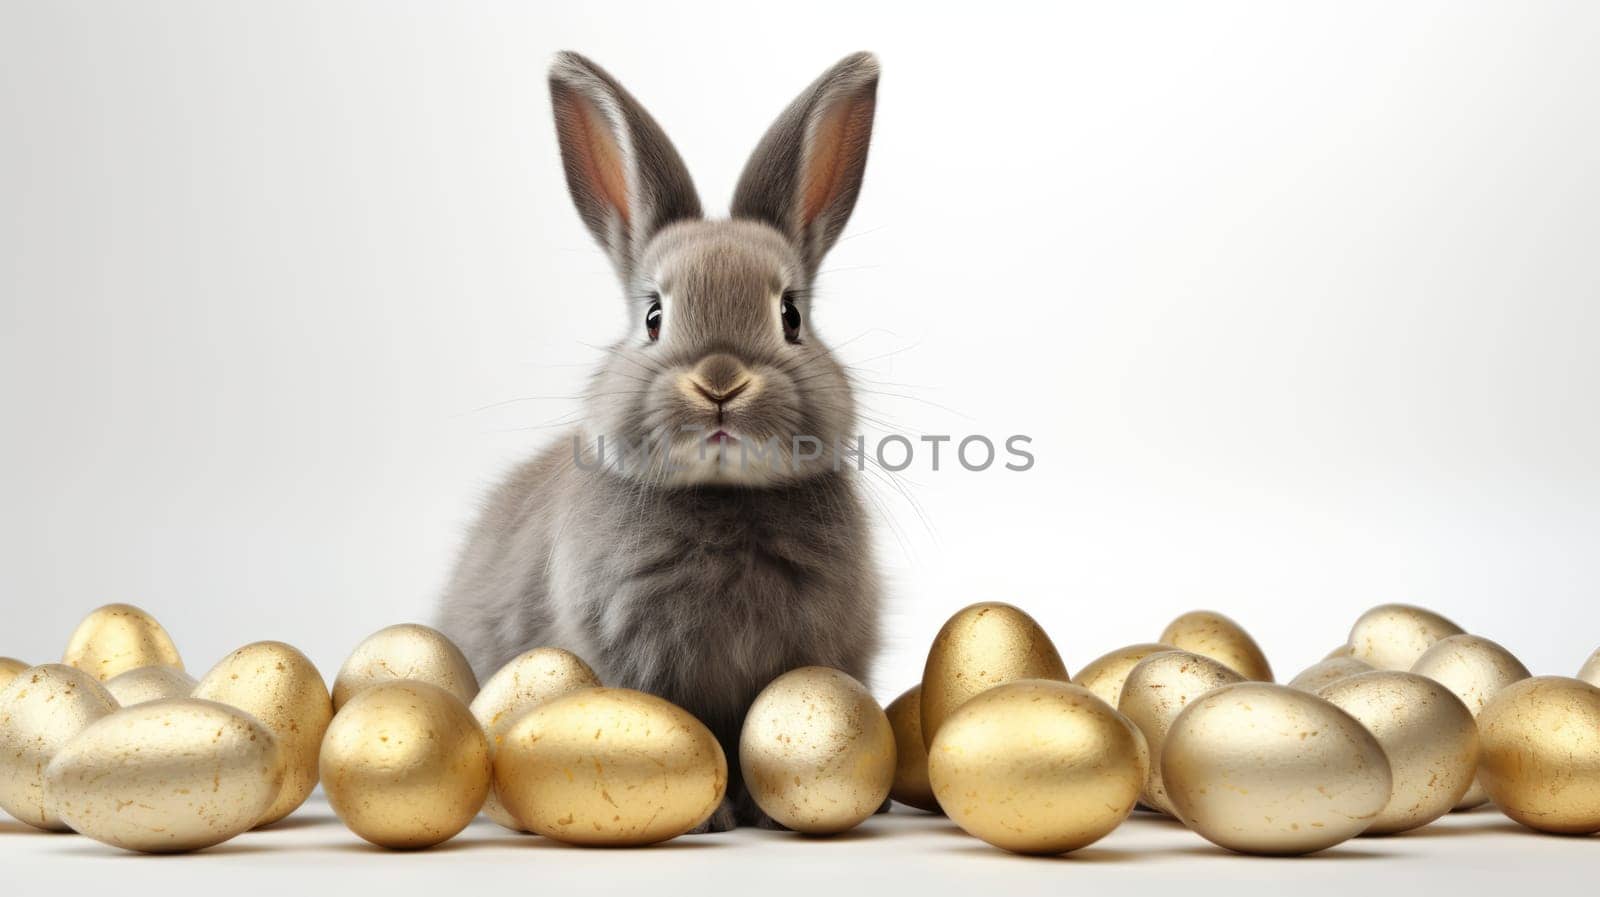 A charming small gray rabbit surrounded by shiny gold and silver Easter eggs on a bright white background. The rabbit is gazing directly at the camera, adding a touch of whimsy to the festive scene.